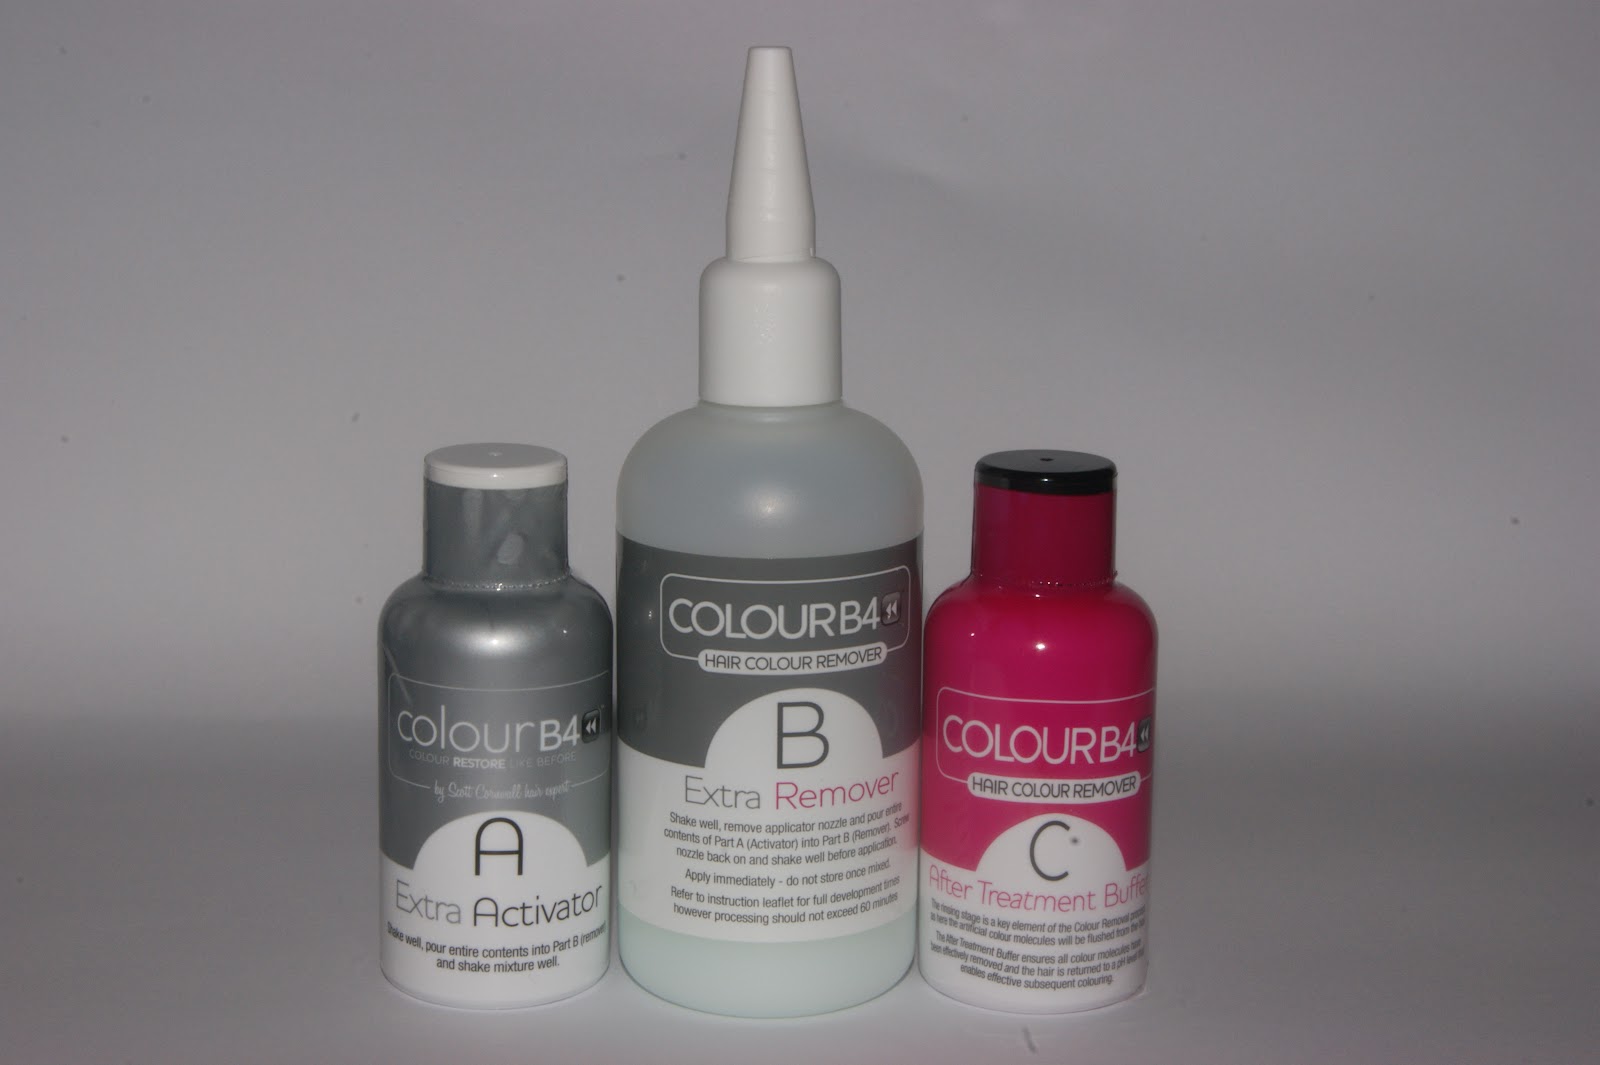 Colourless & ColourB4 SA - Need proof that Colour B4 effectively